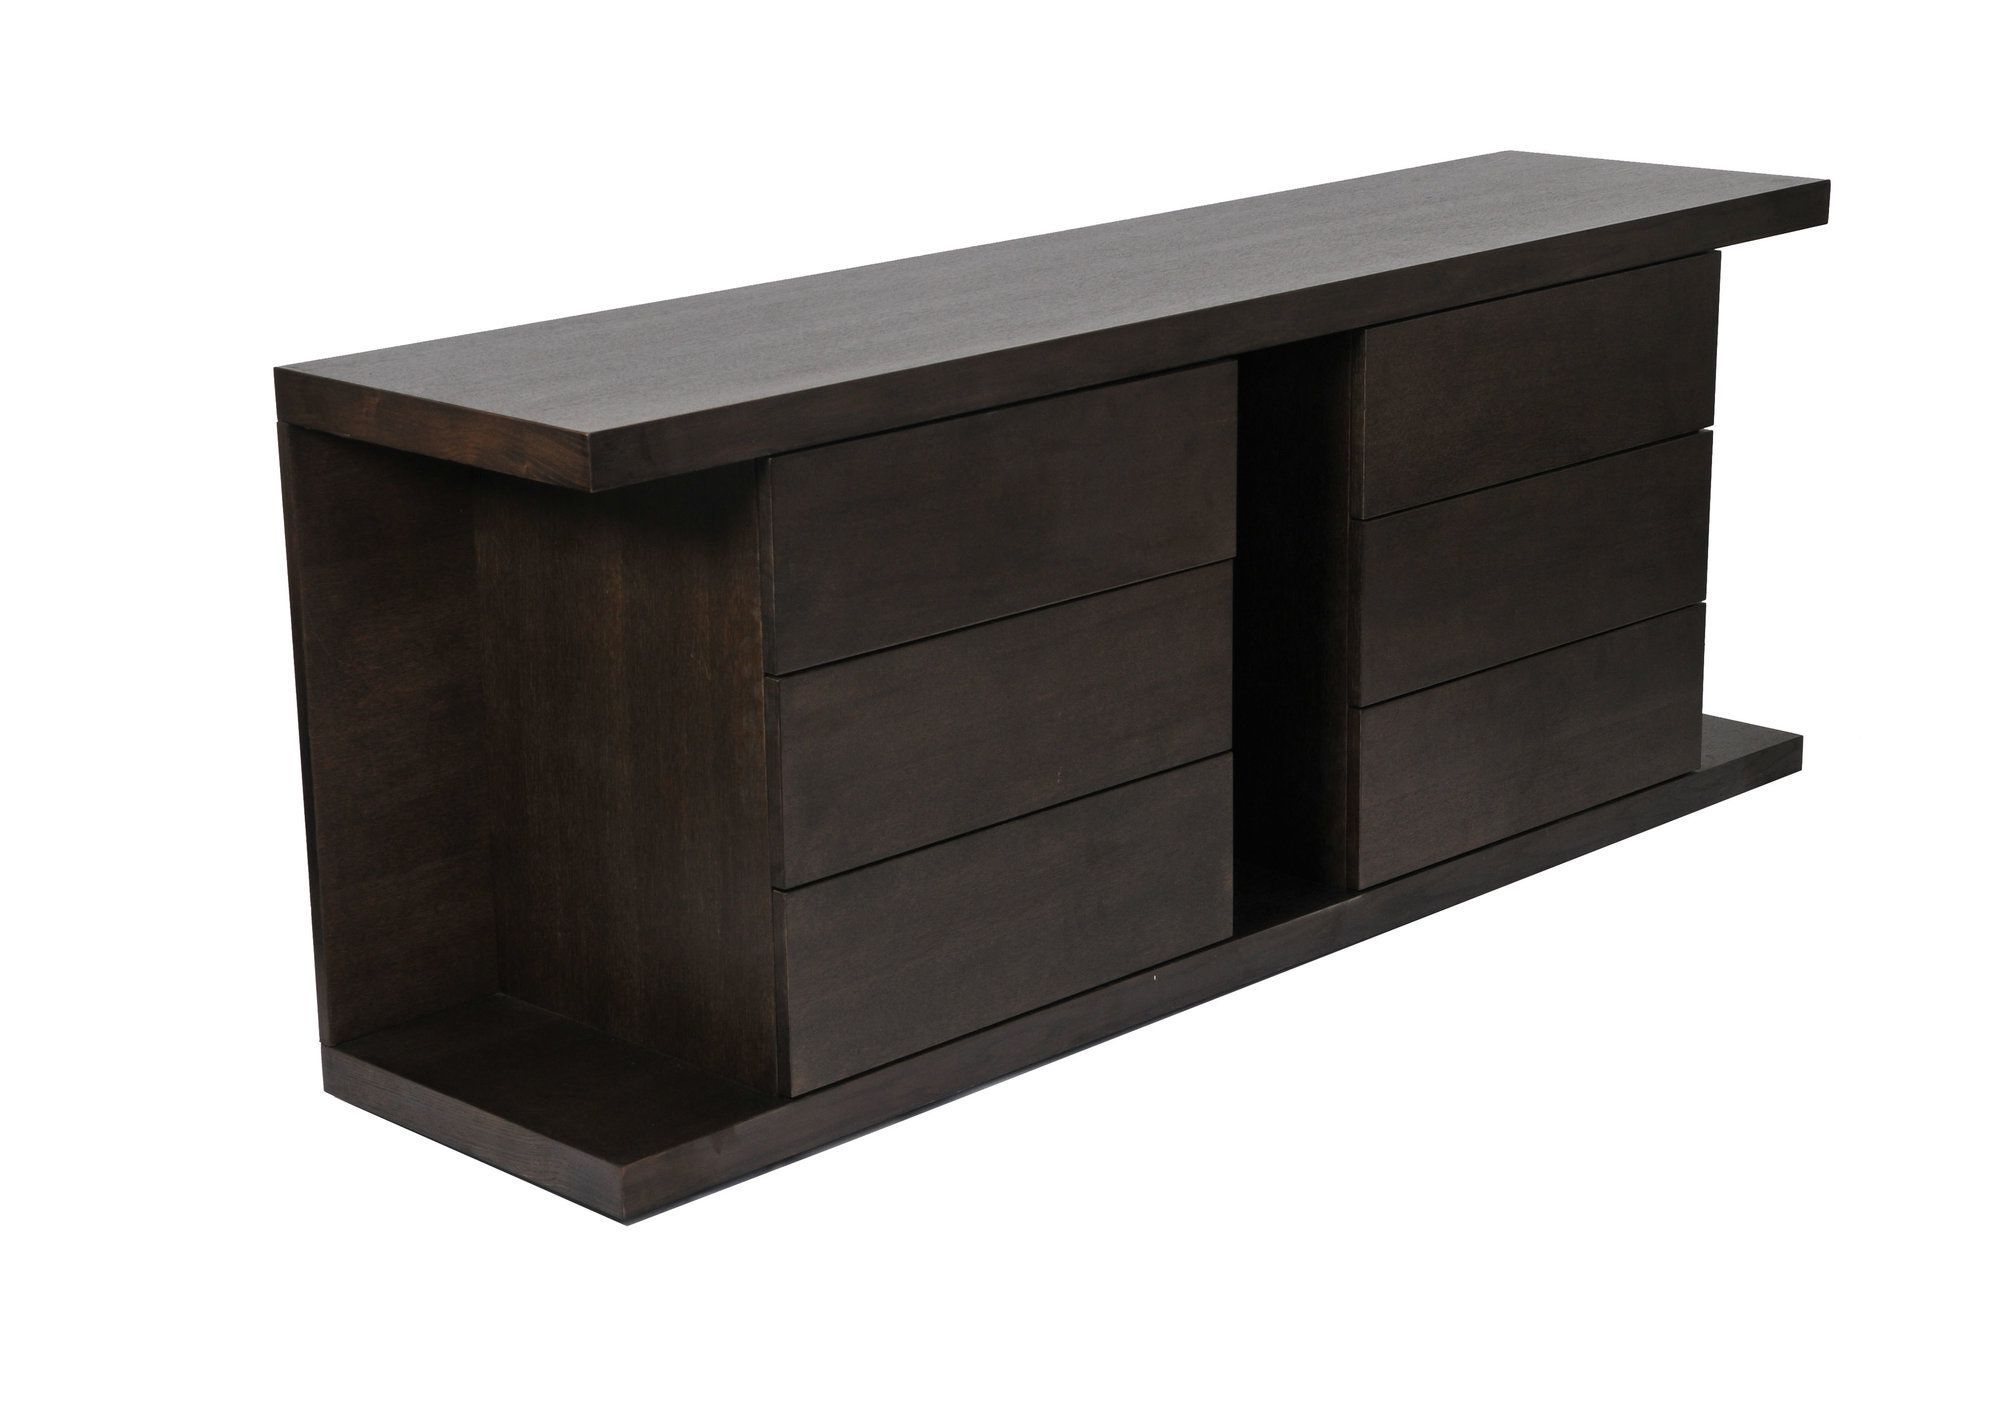 Thite Sideboard | Products | Dining Buffet, Sideboard With Regard To Thite Sideboards (Gallery 2 of 20)